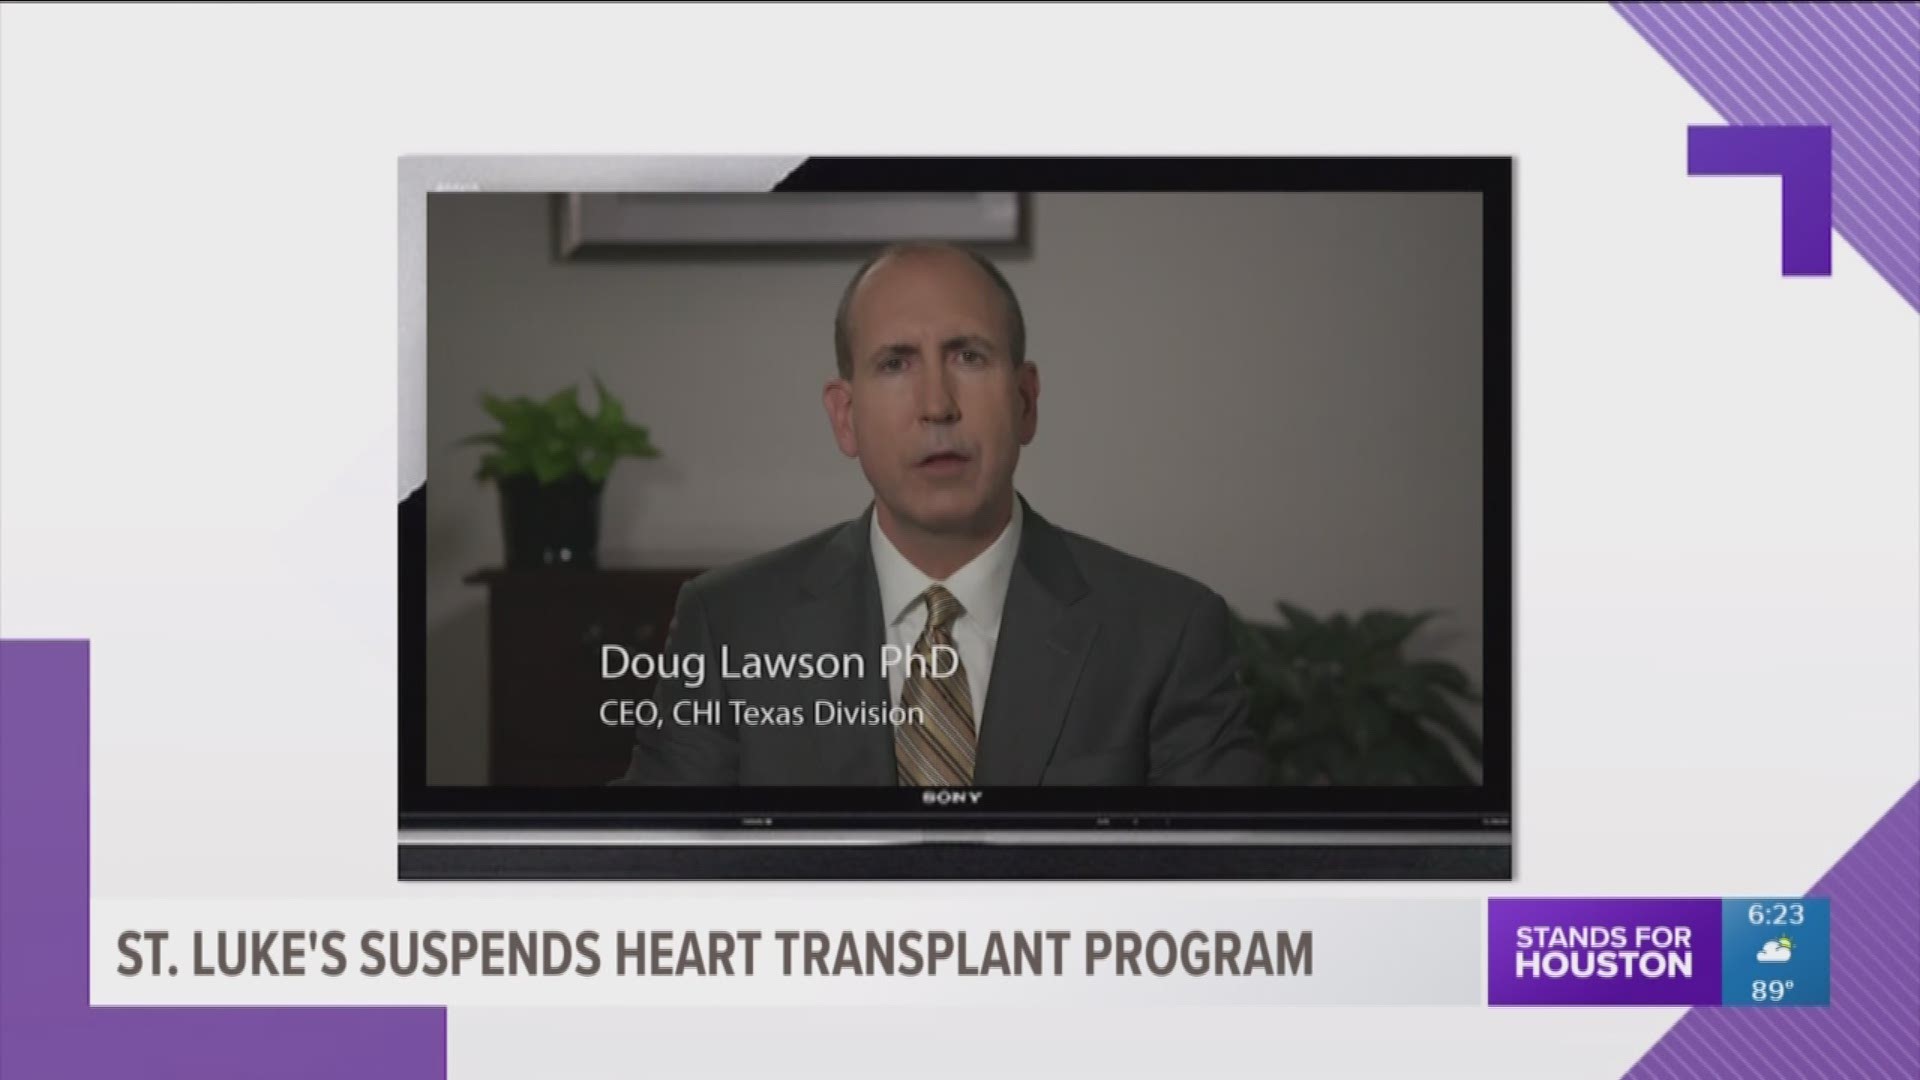 Baylor St. Luke's Medical Center is temporarily suspending its renowned heart transplant program after two patients died in recent weeks.